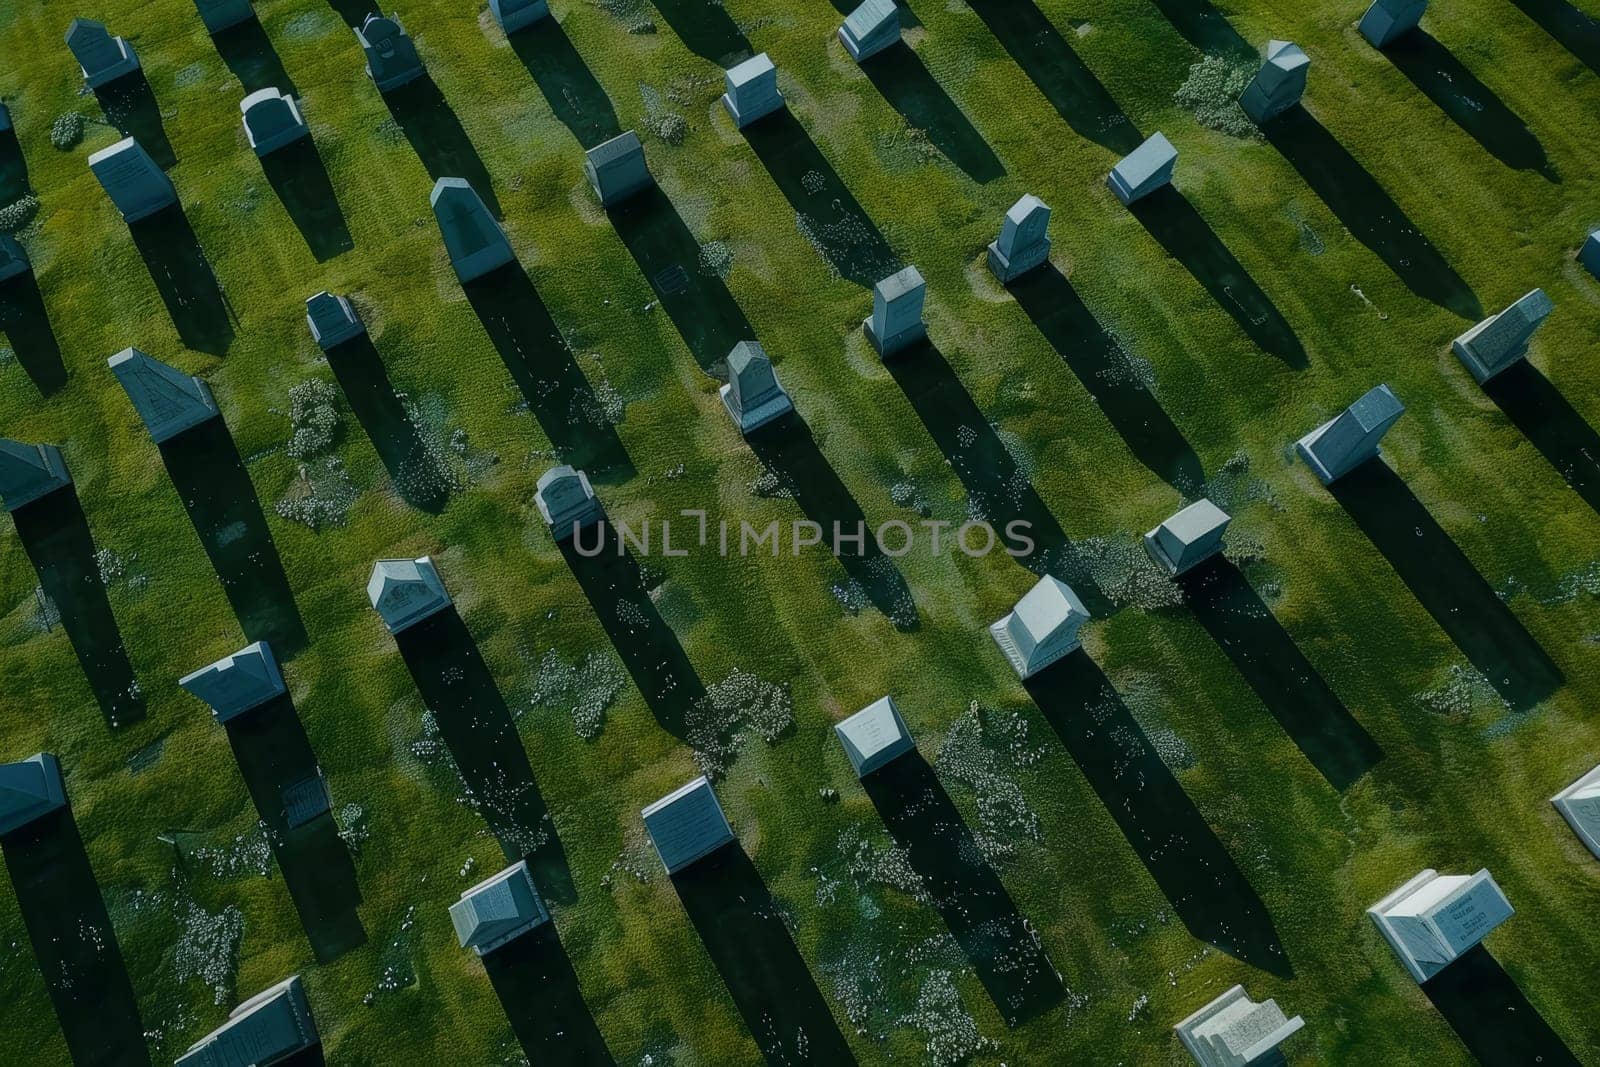 Aerial View of Cemetery Headstones and Grass with Long Shadows